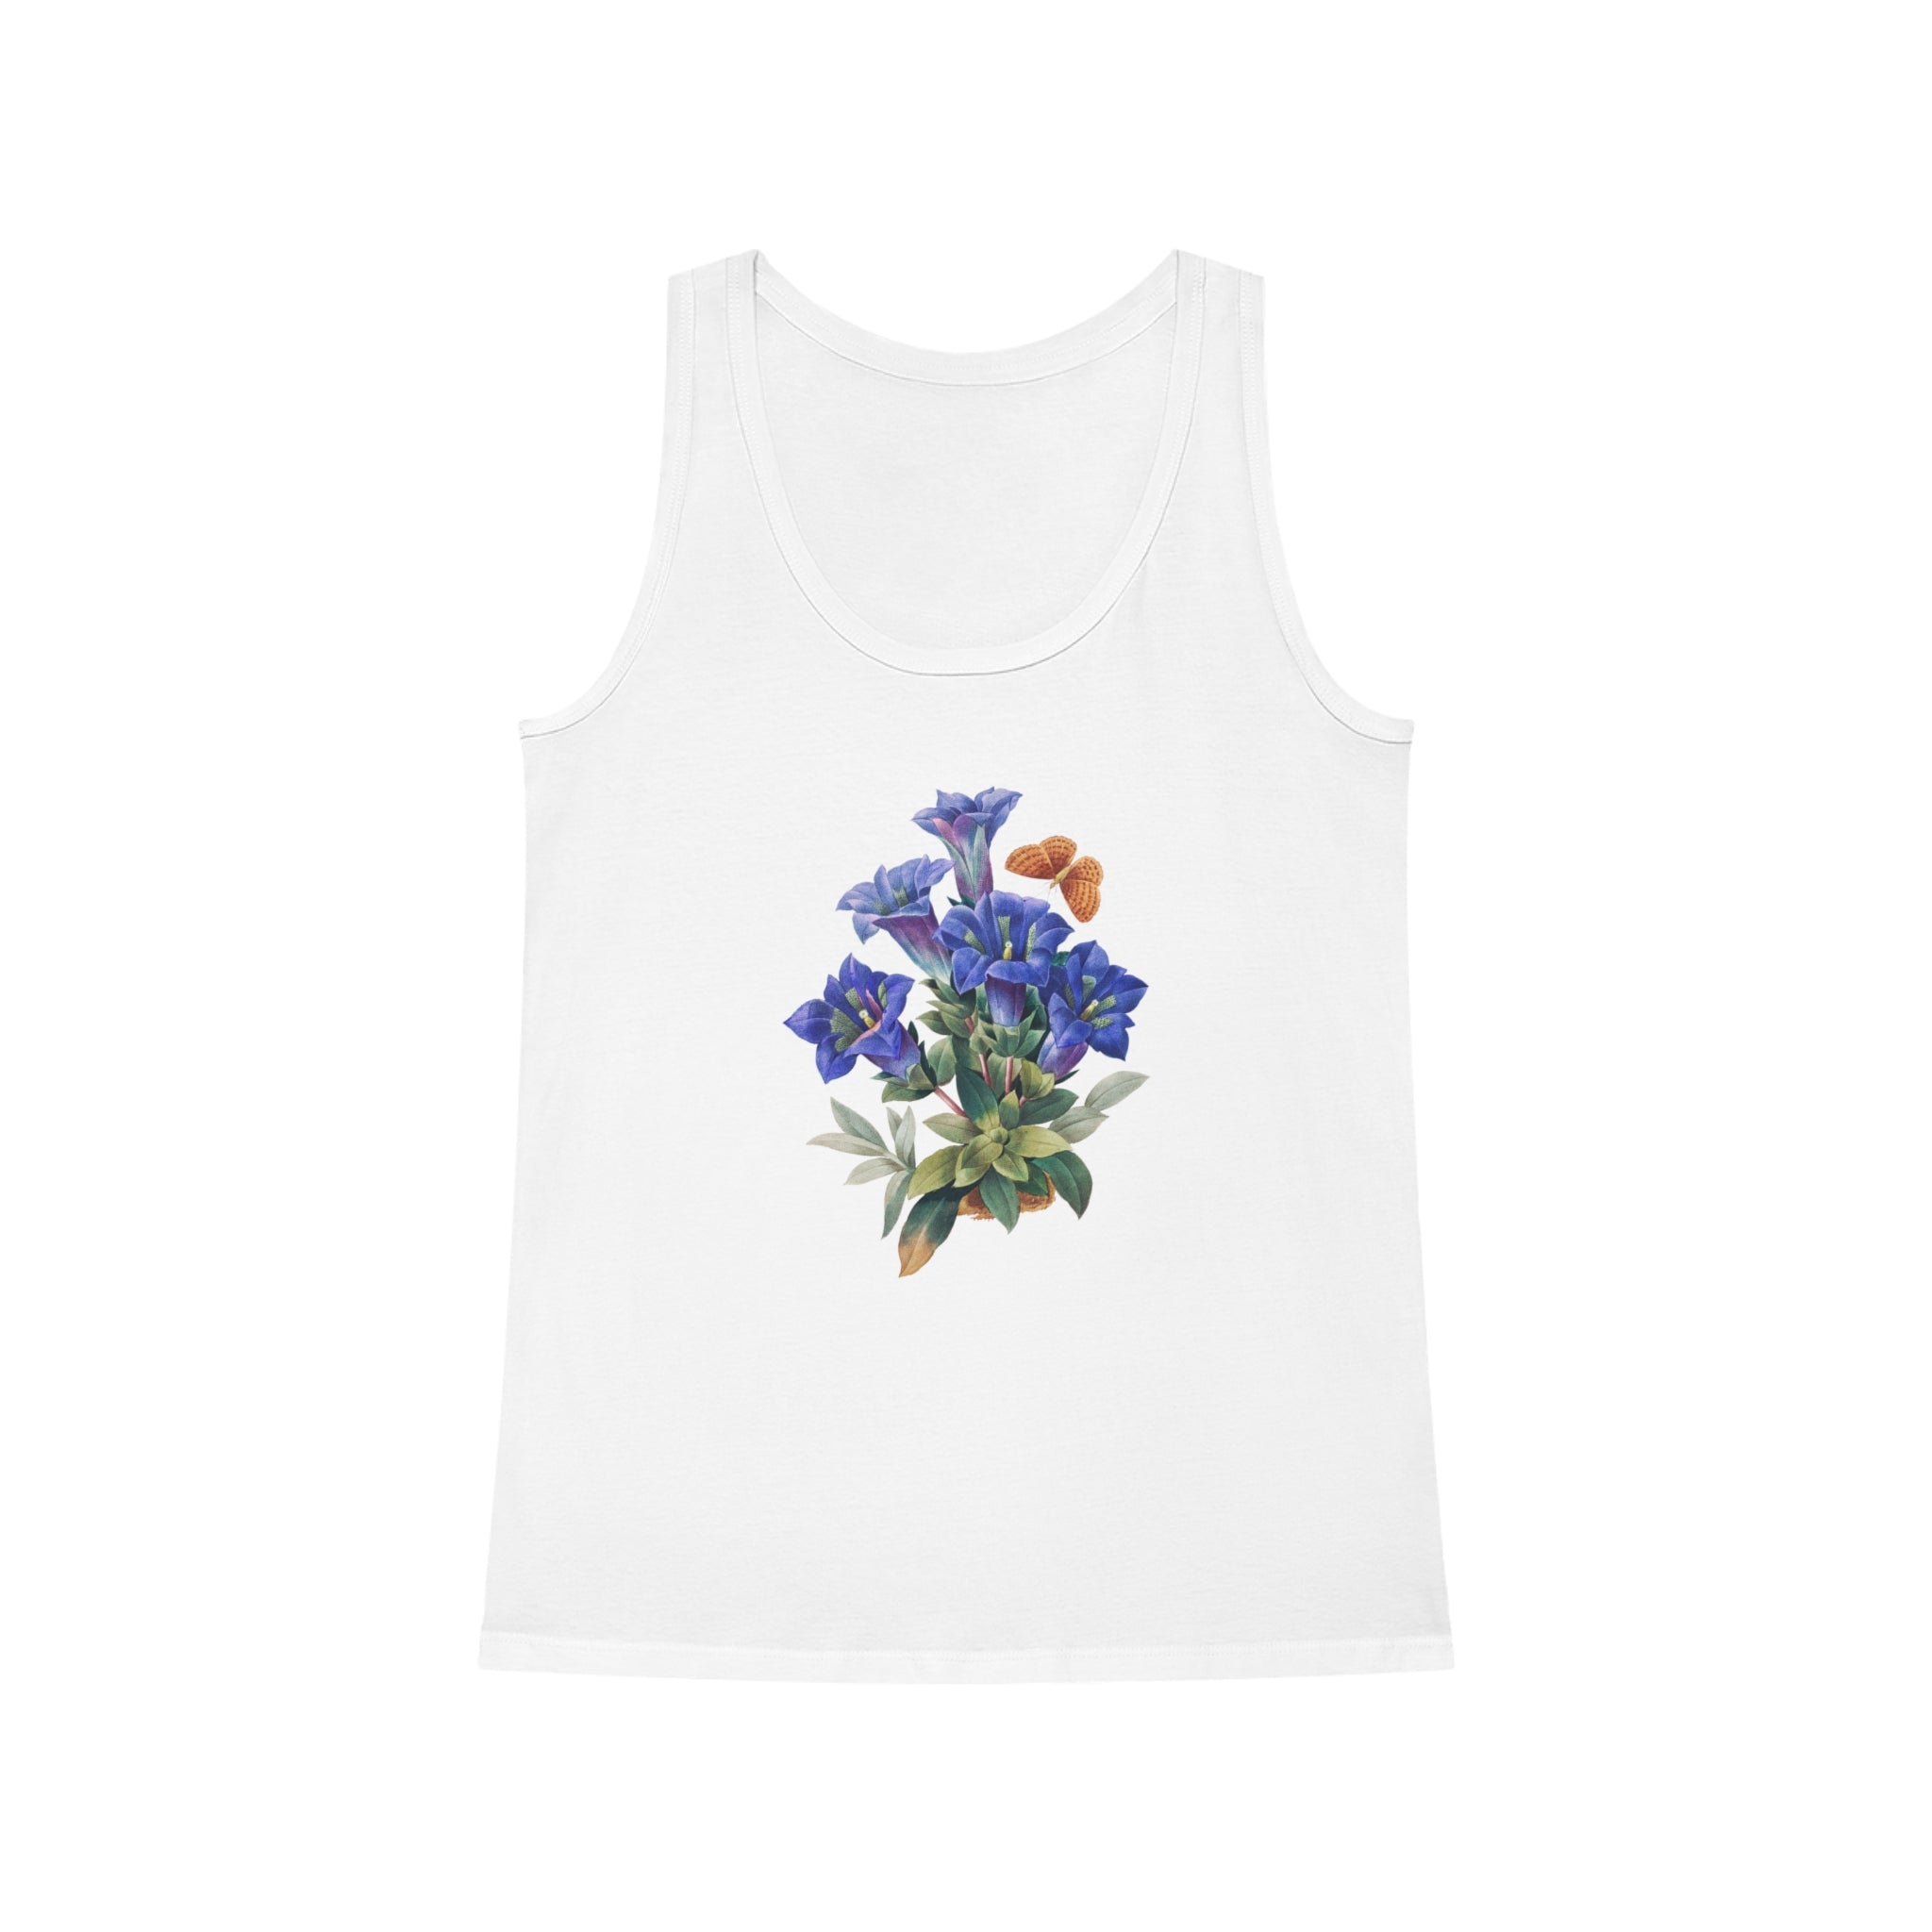 This Bouquet Tank Top features a vibrant bouquet of blue flowers, perfect for any occasion.